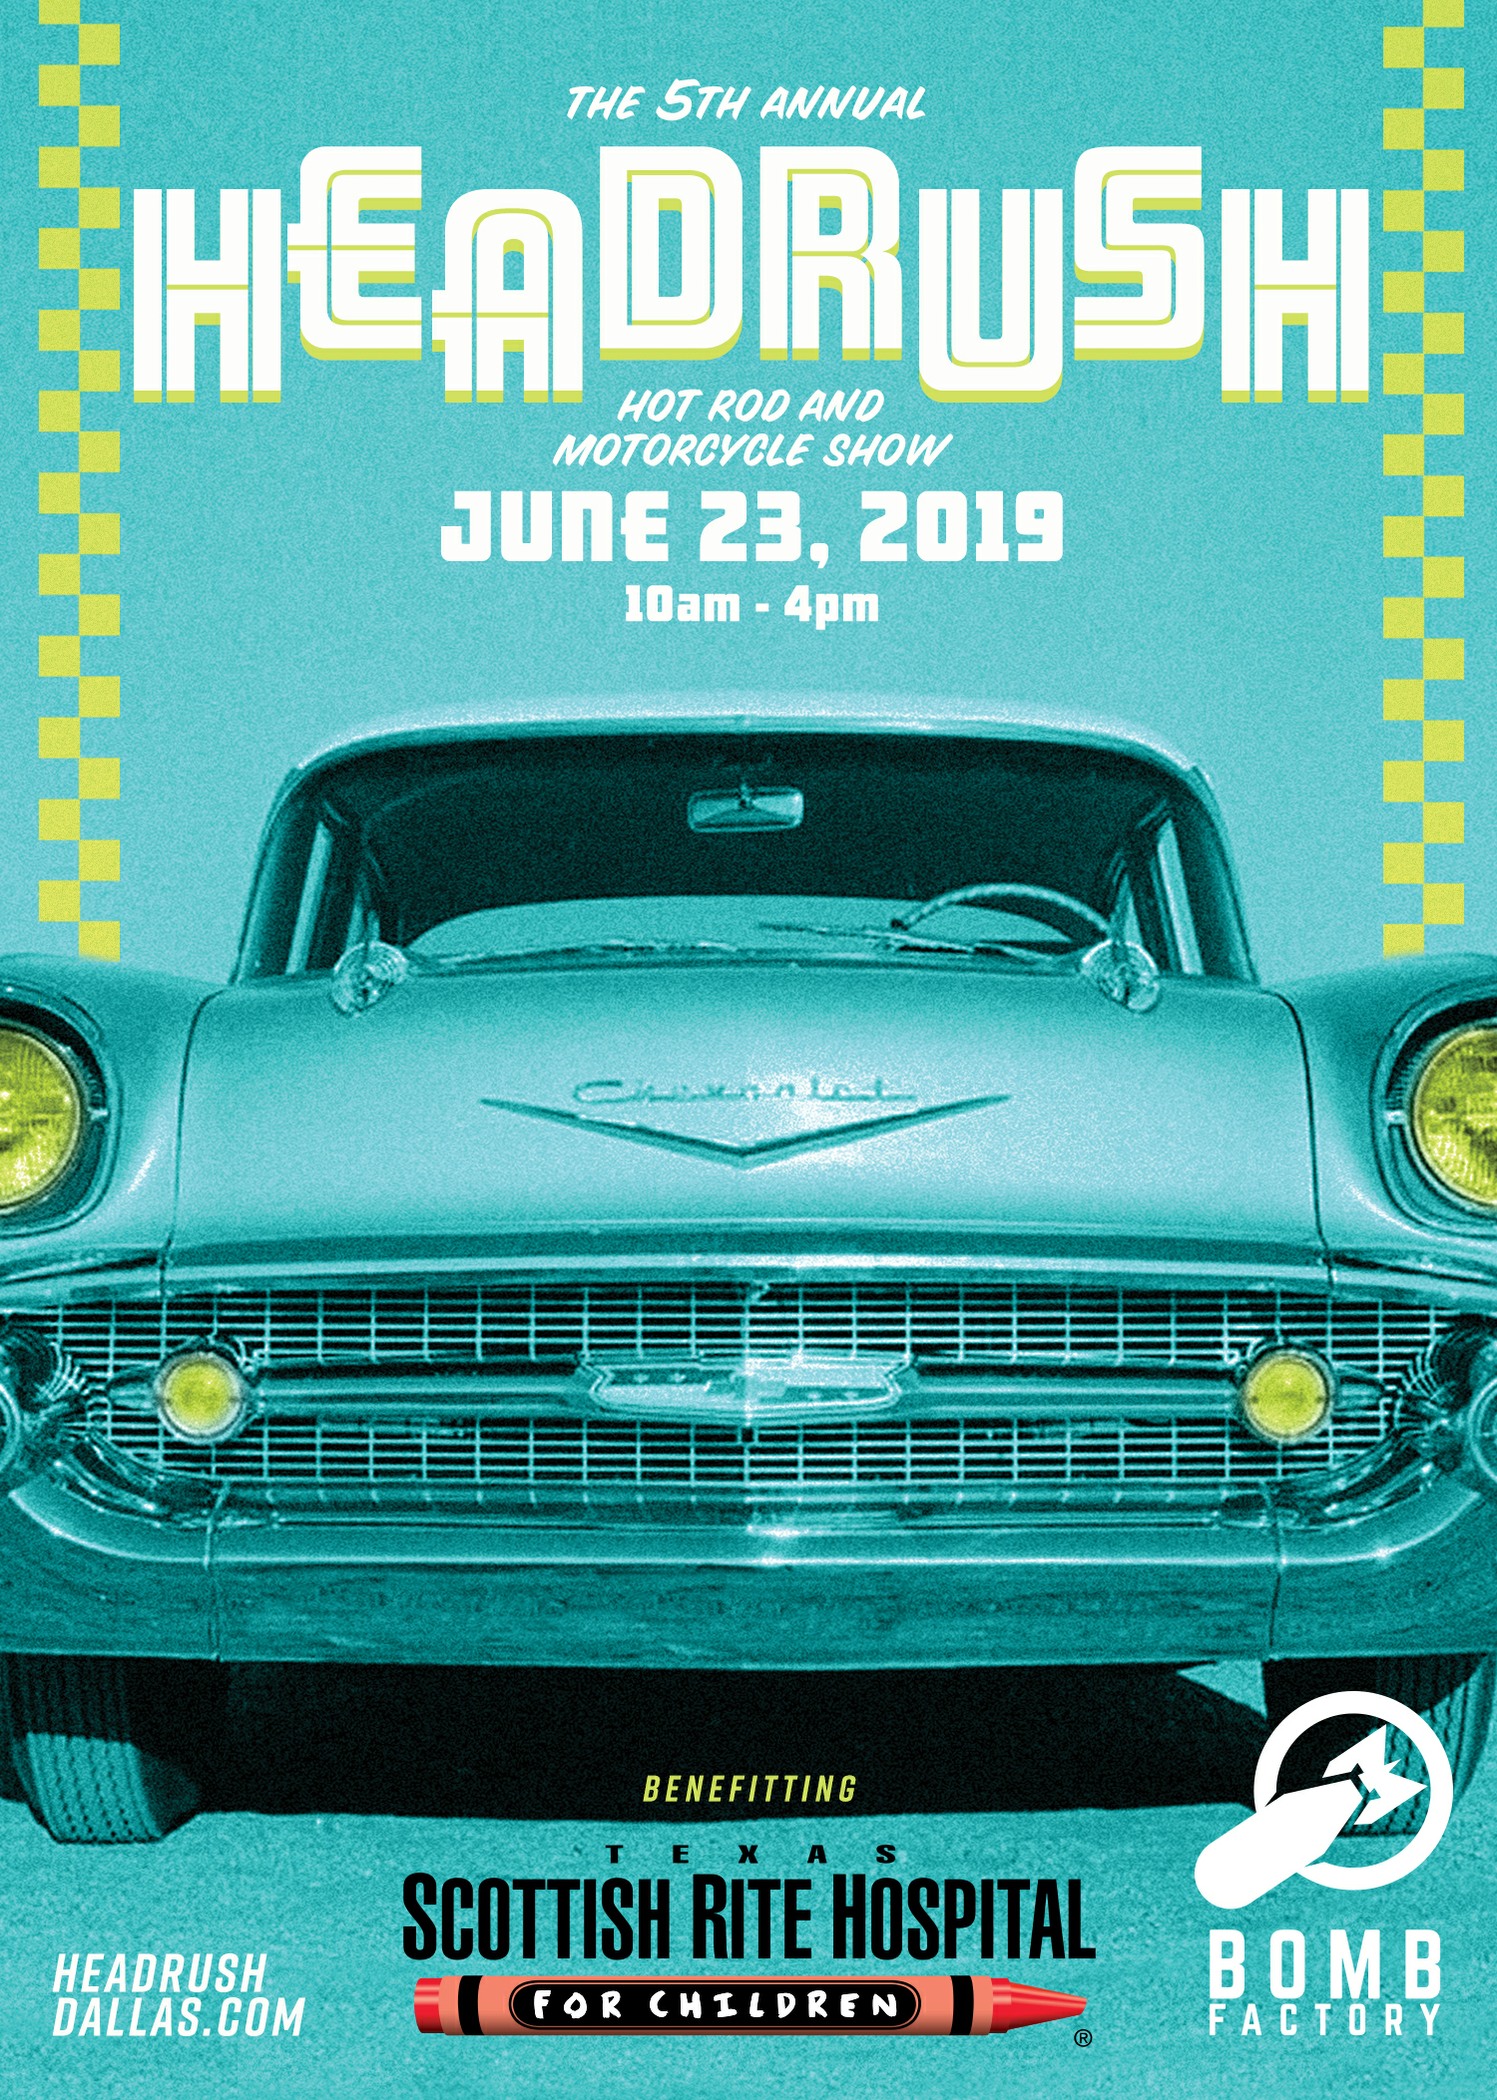 5th Annual HeadRush Hot Rod & Motorcycle Show